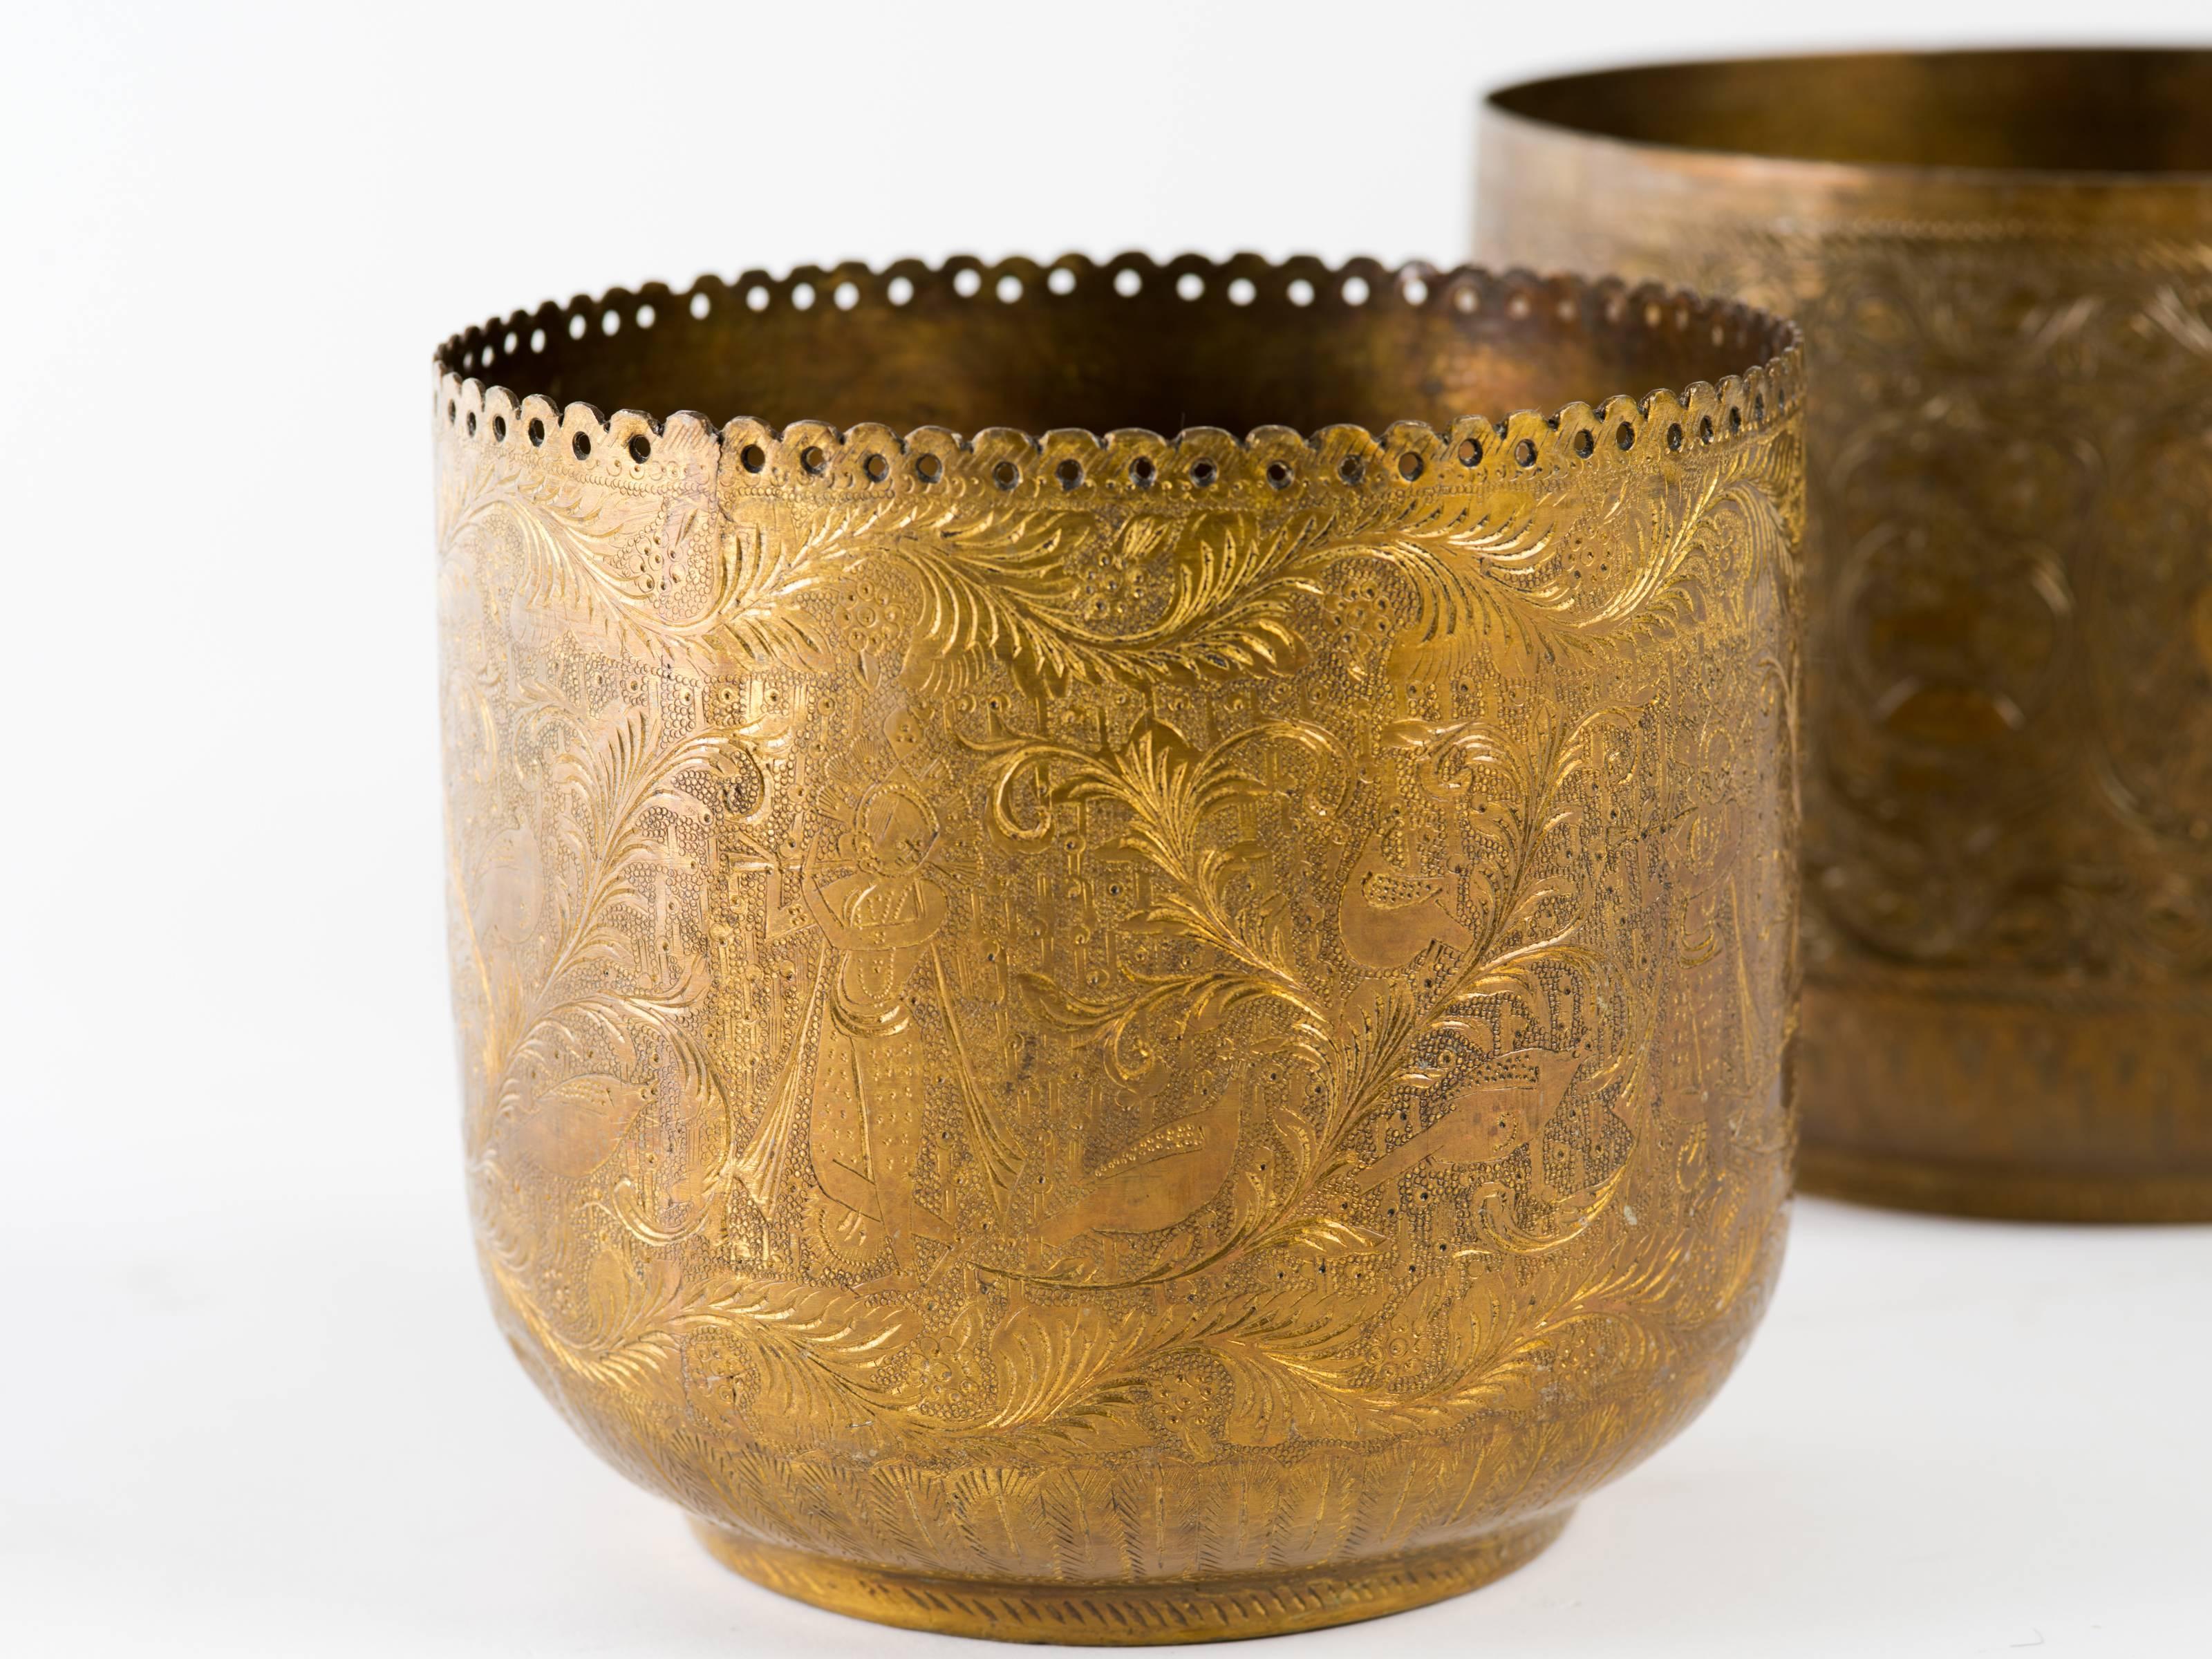 Vintage Indian hand-wrought brass jardiniere vessel. Completely and finely engraved throughout with Indian gods, flora, and fauna.